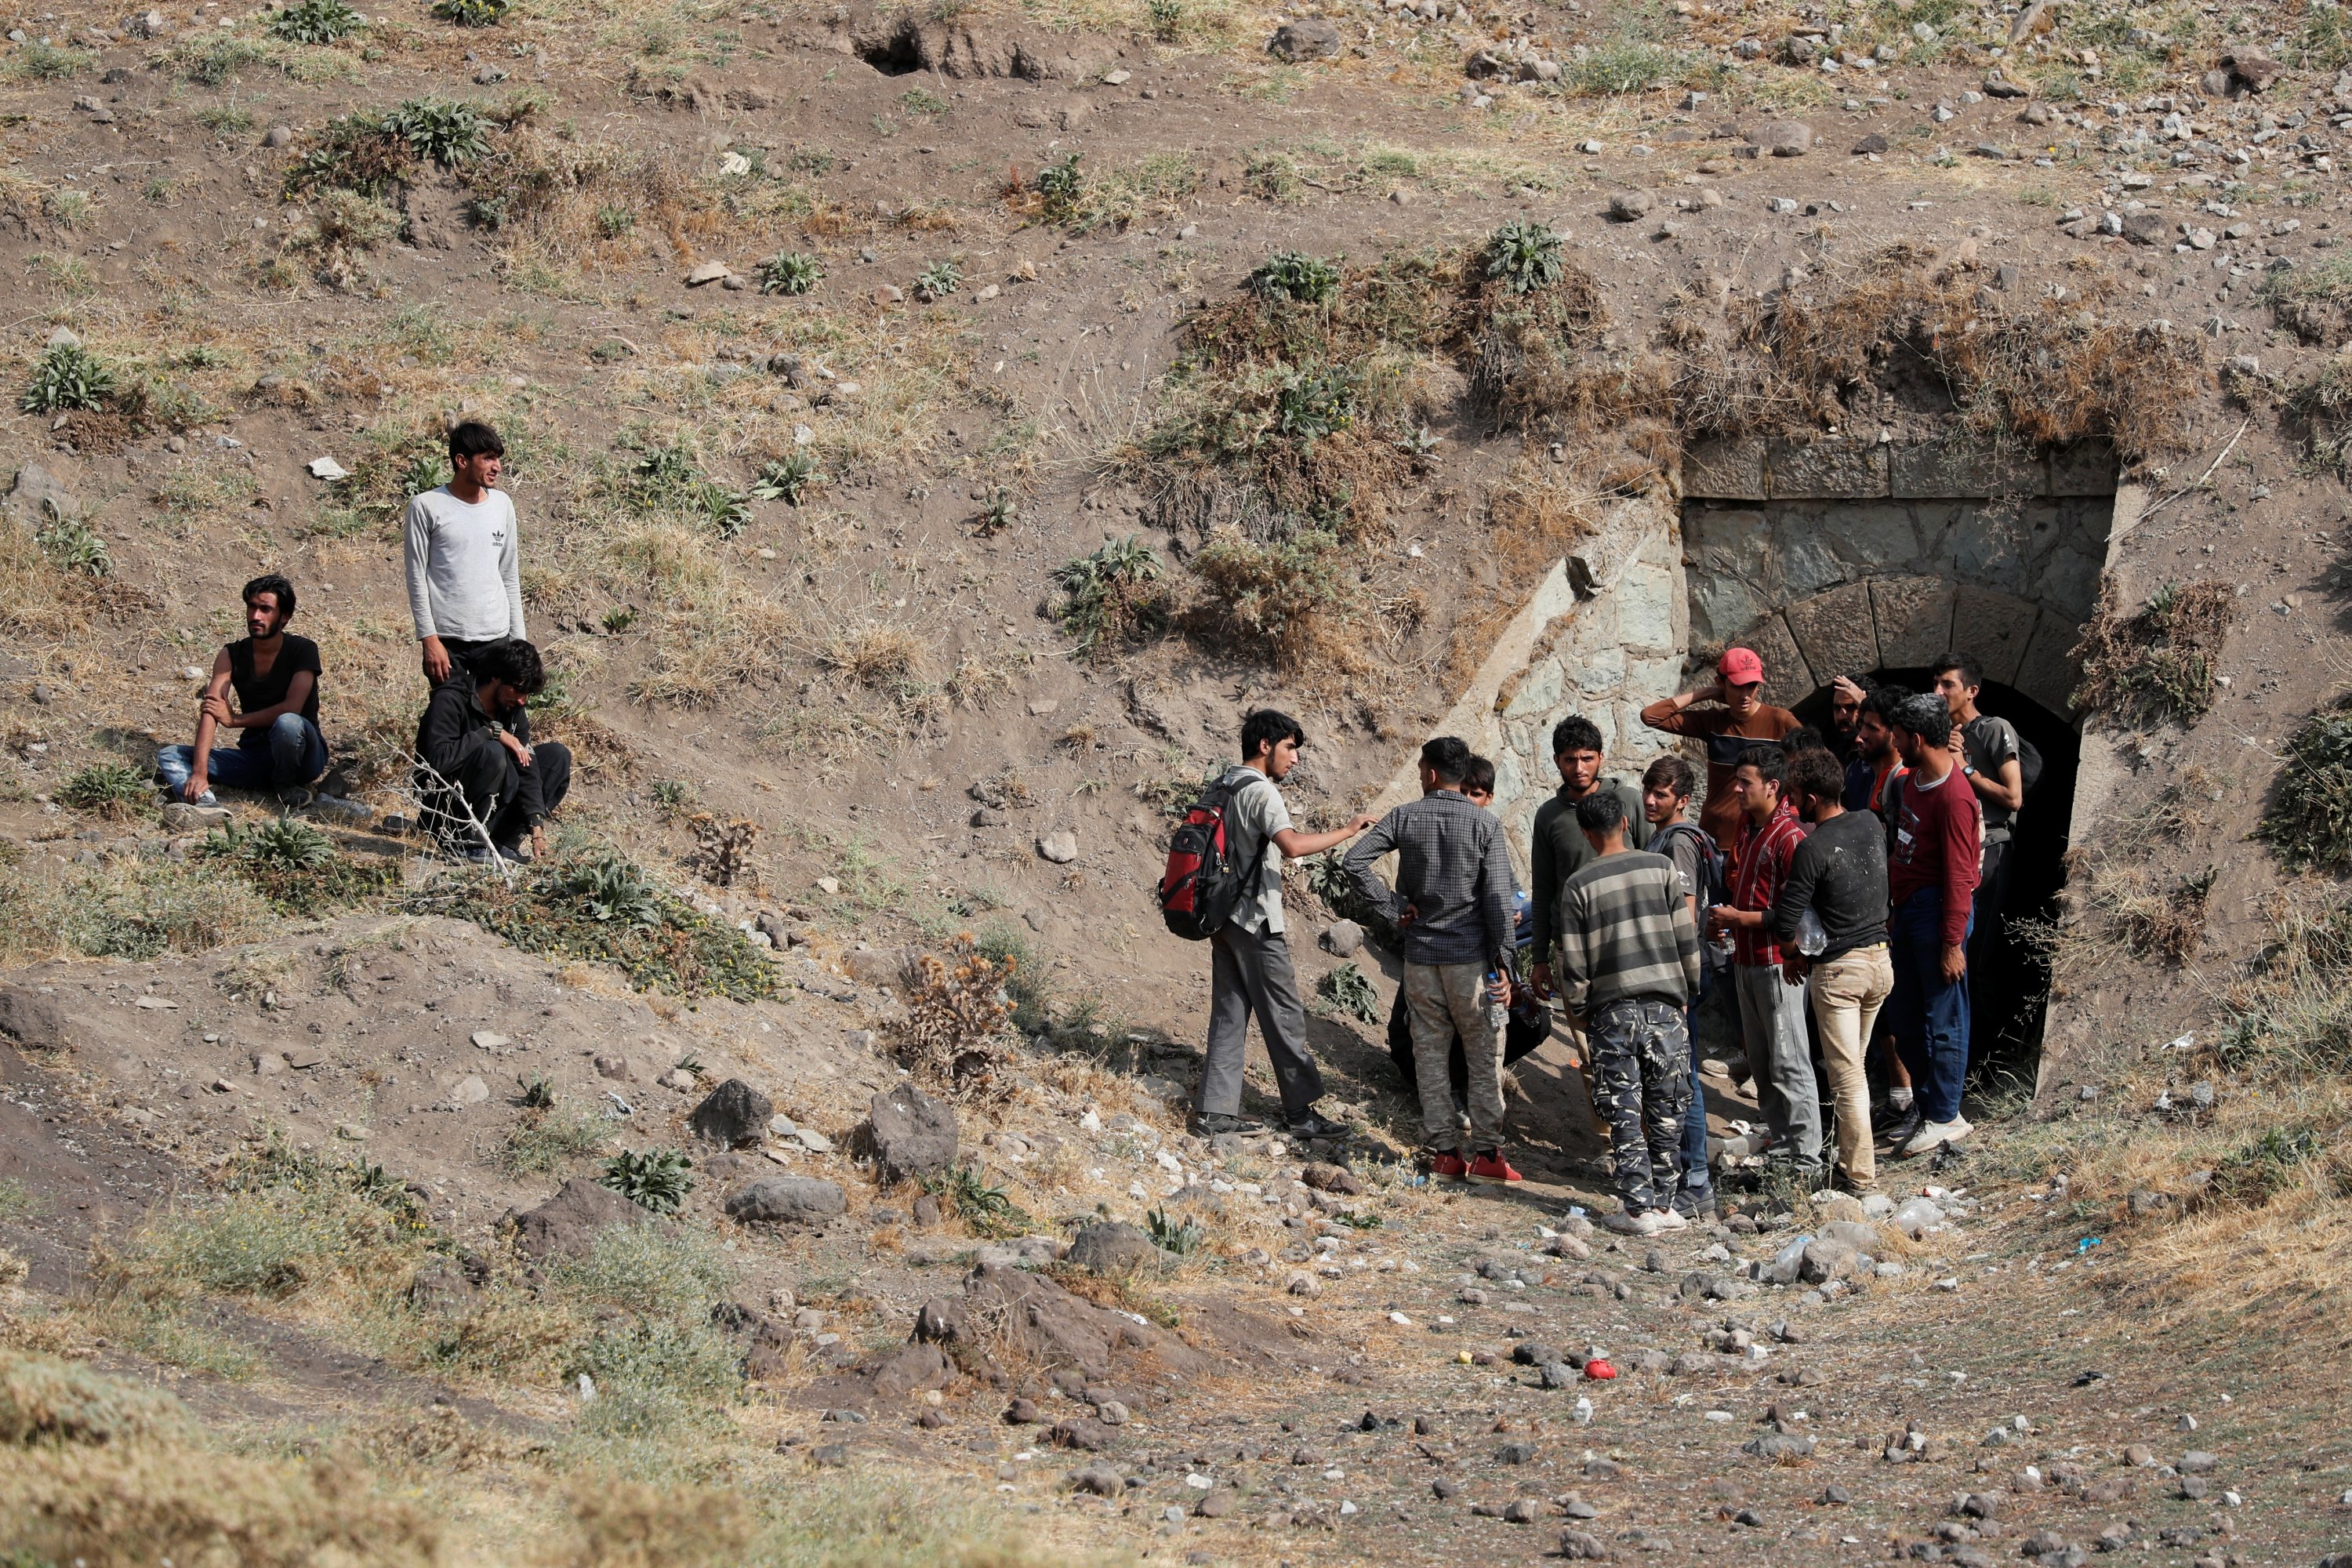 Afghan migrants stand outside a tunnel under train tracks after crossing illegally into Turkey from Iran, as they hide from security forces near Tatvan in Bitlis province, Turkey, Aug. 23, 2021. (Reuters Photo)